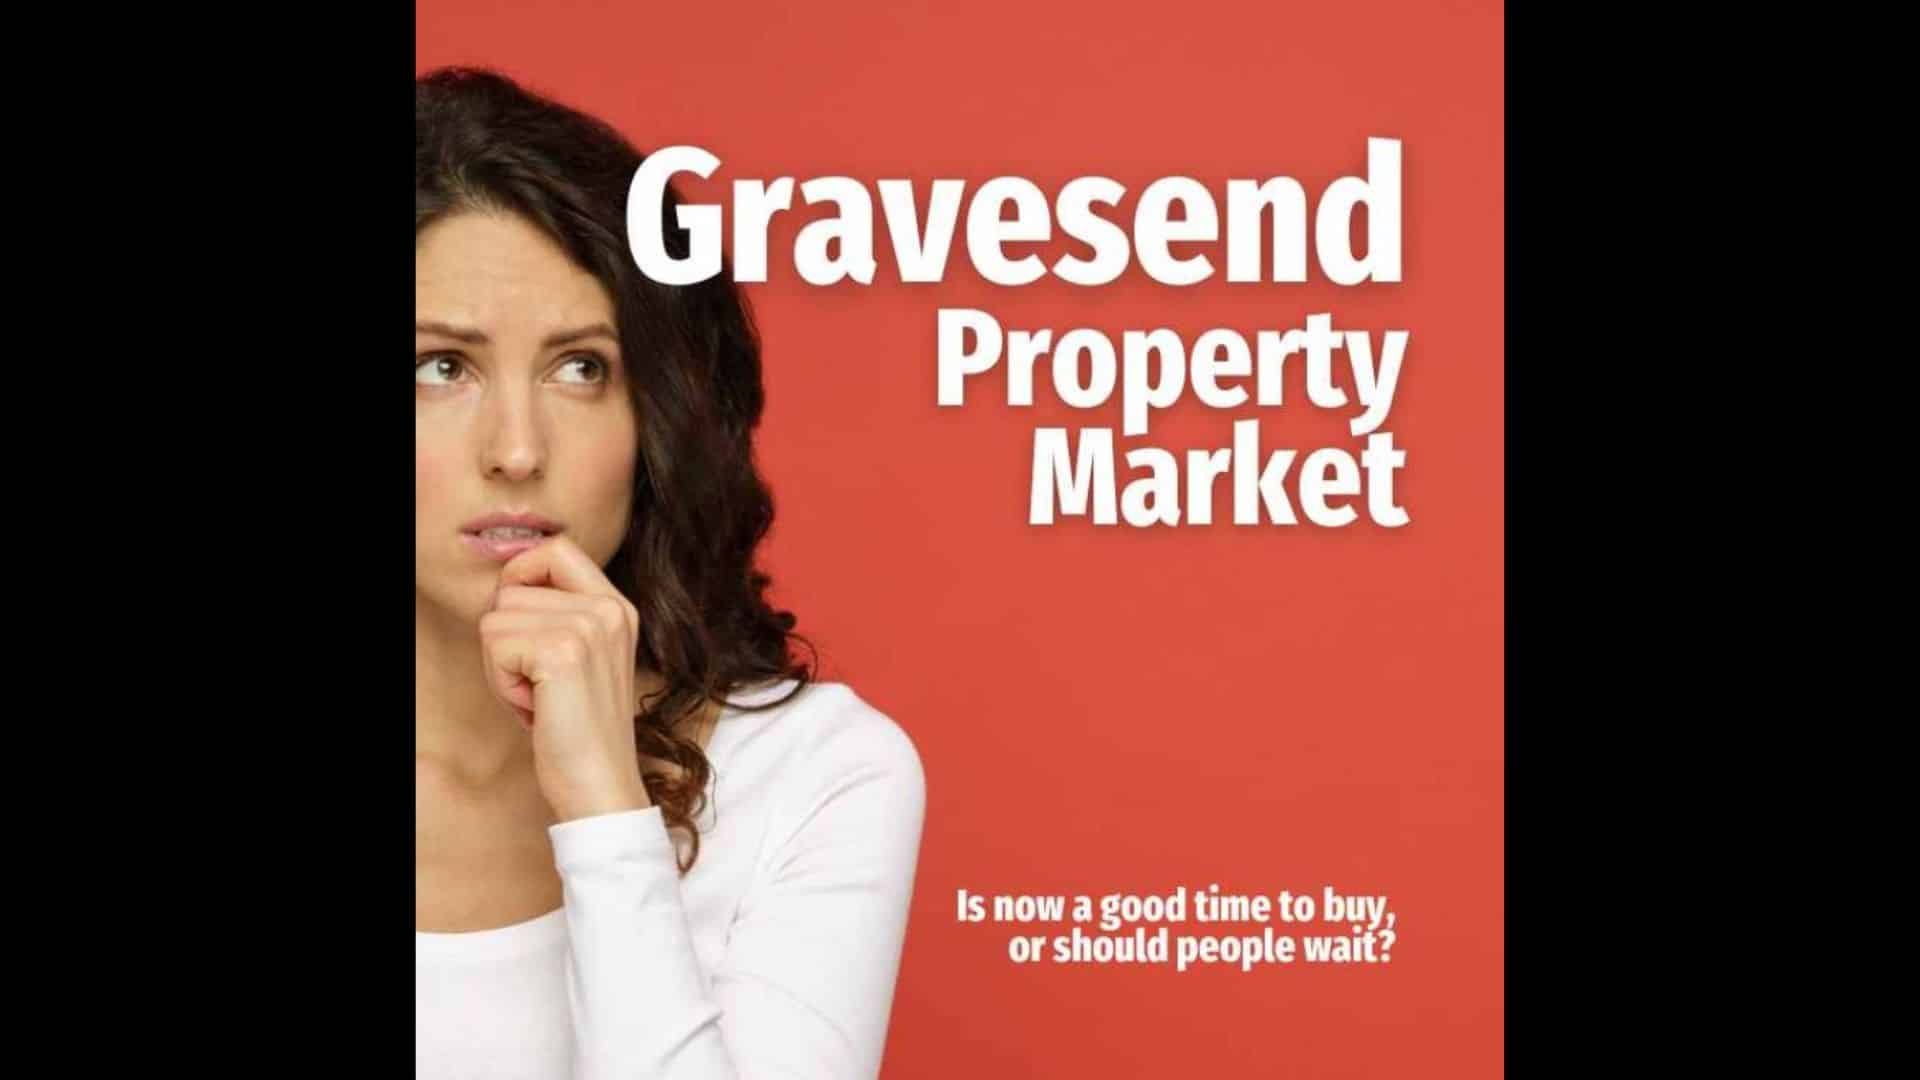 Gravesend Property Market: Is Now A Good Time To Buy, Or Should People Wait?